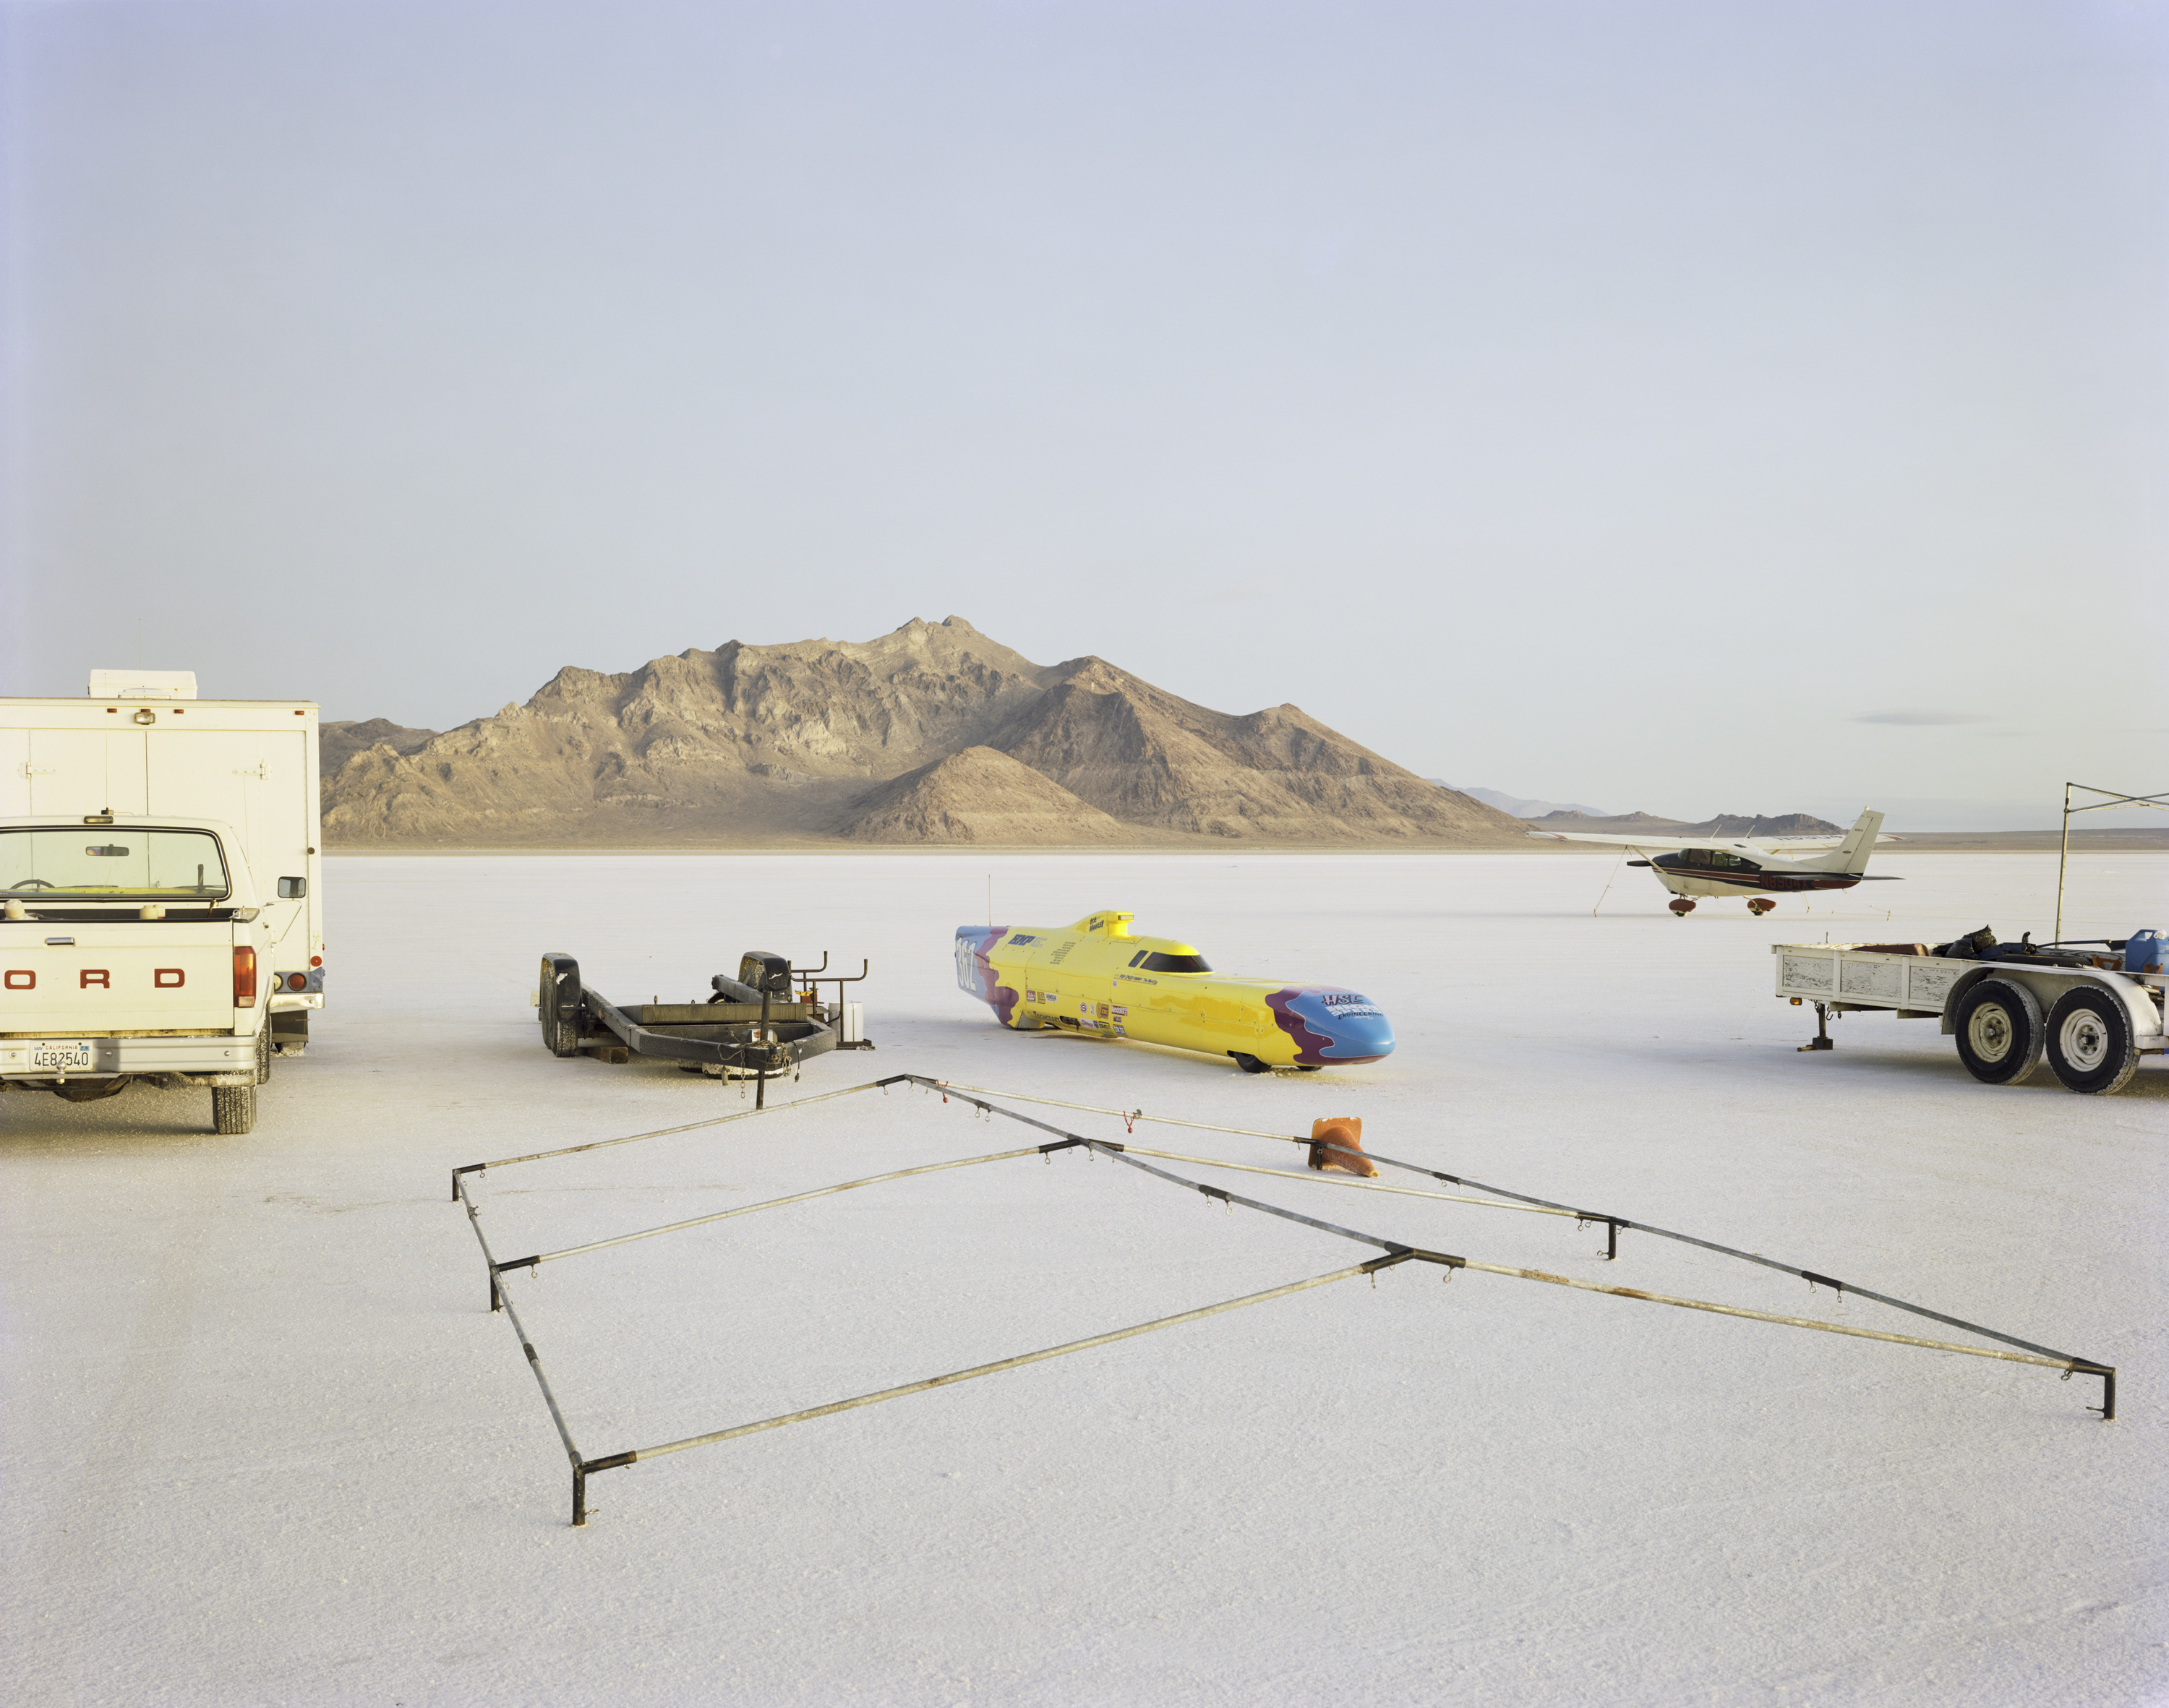 Color photograph of multiple automobiles and a plane in the middle of salt flats with mountains along the horizon